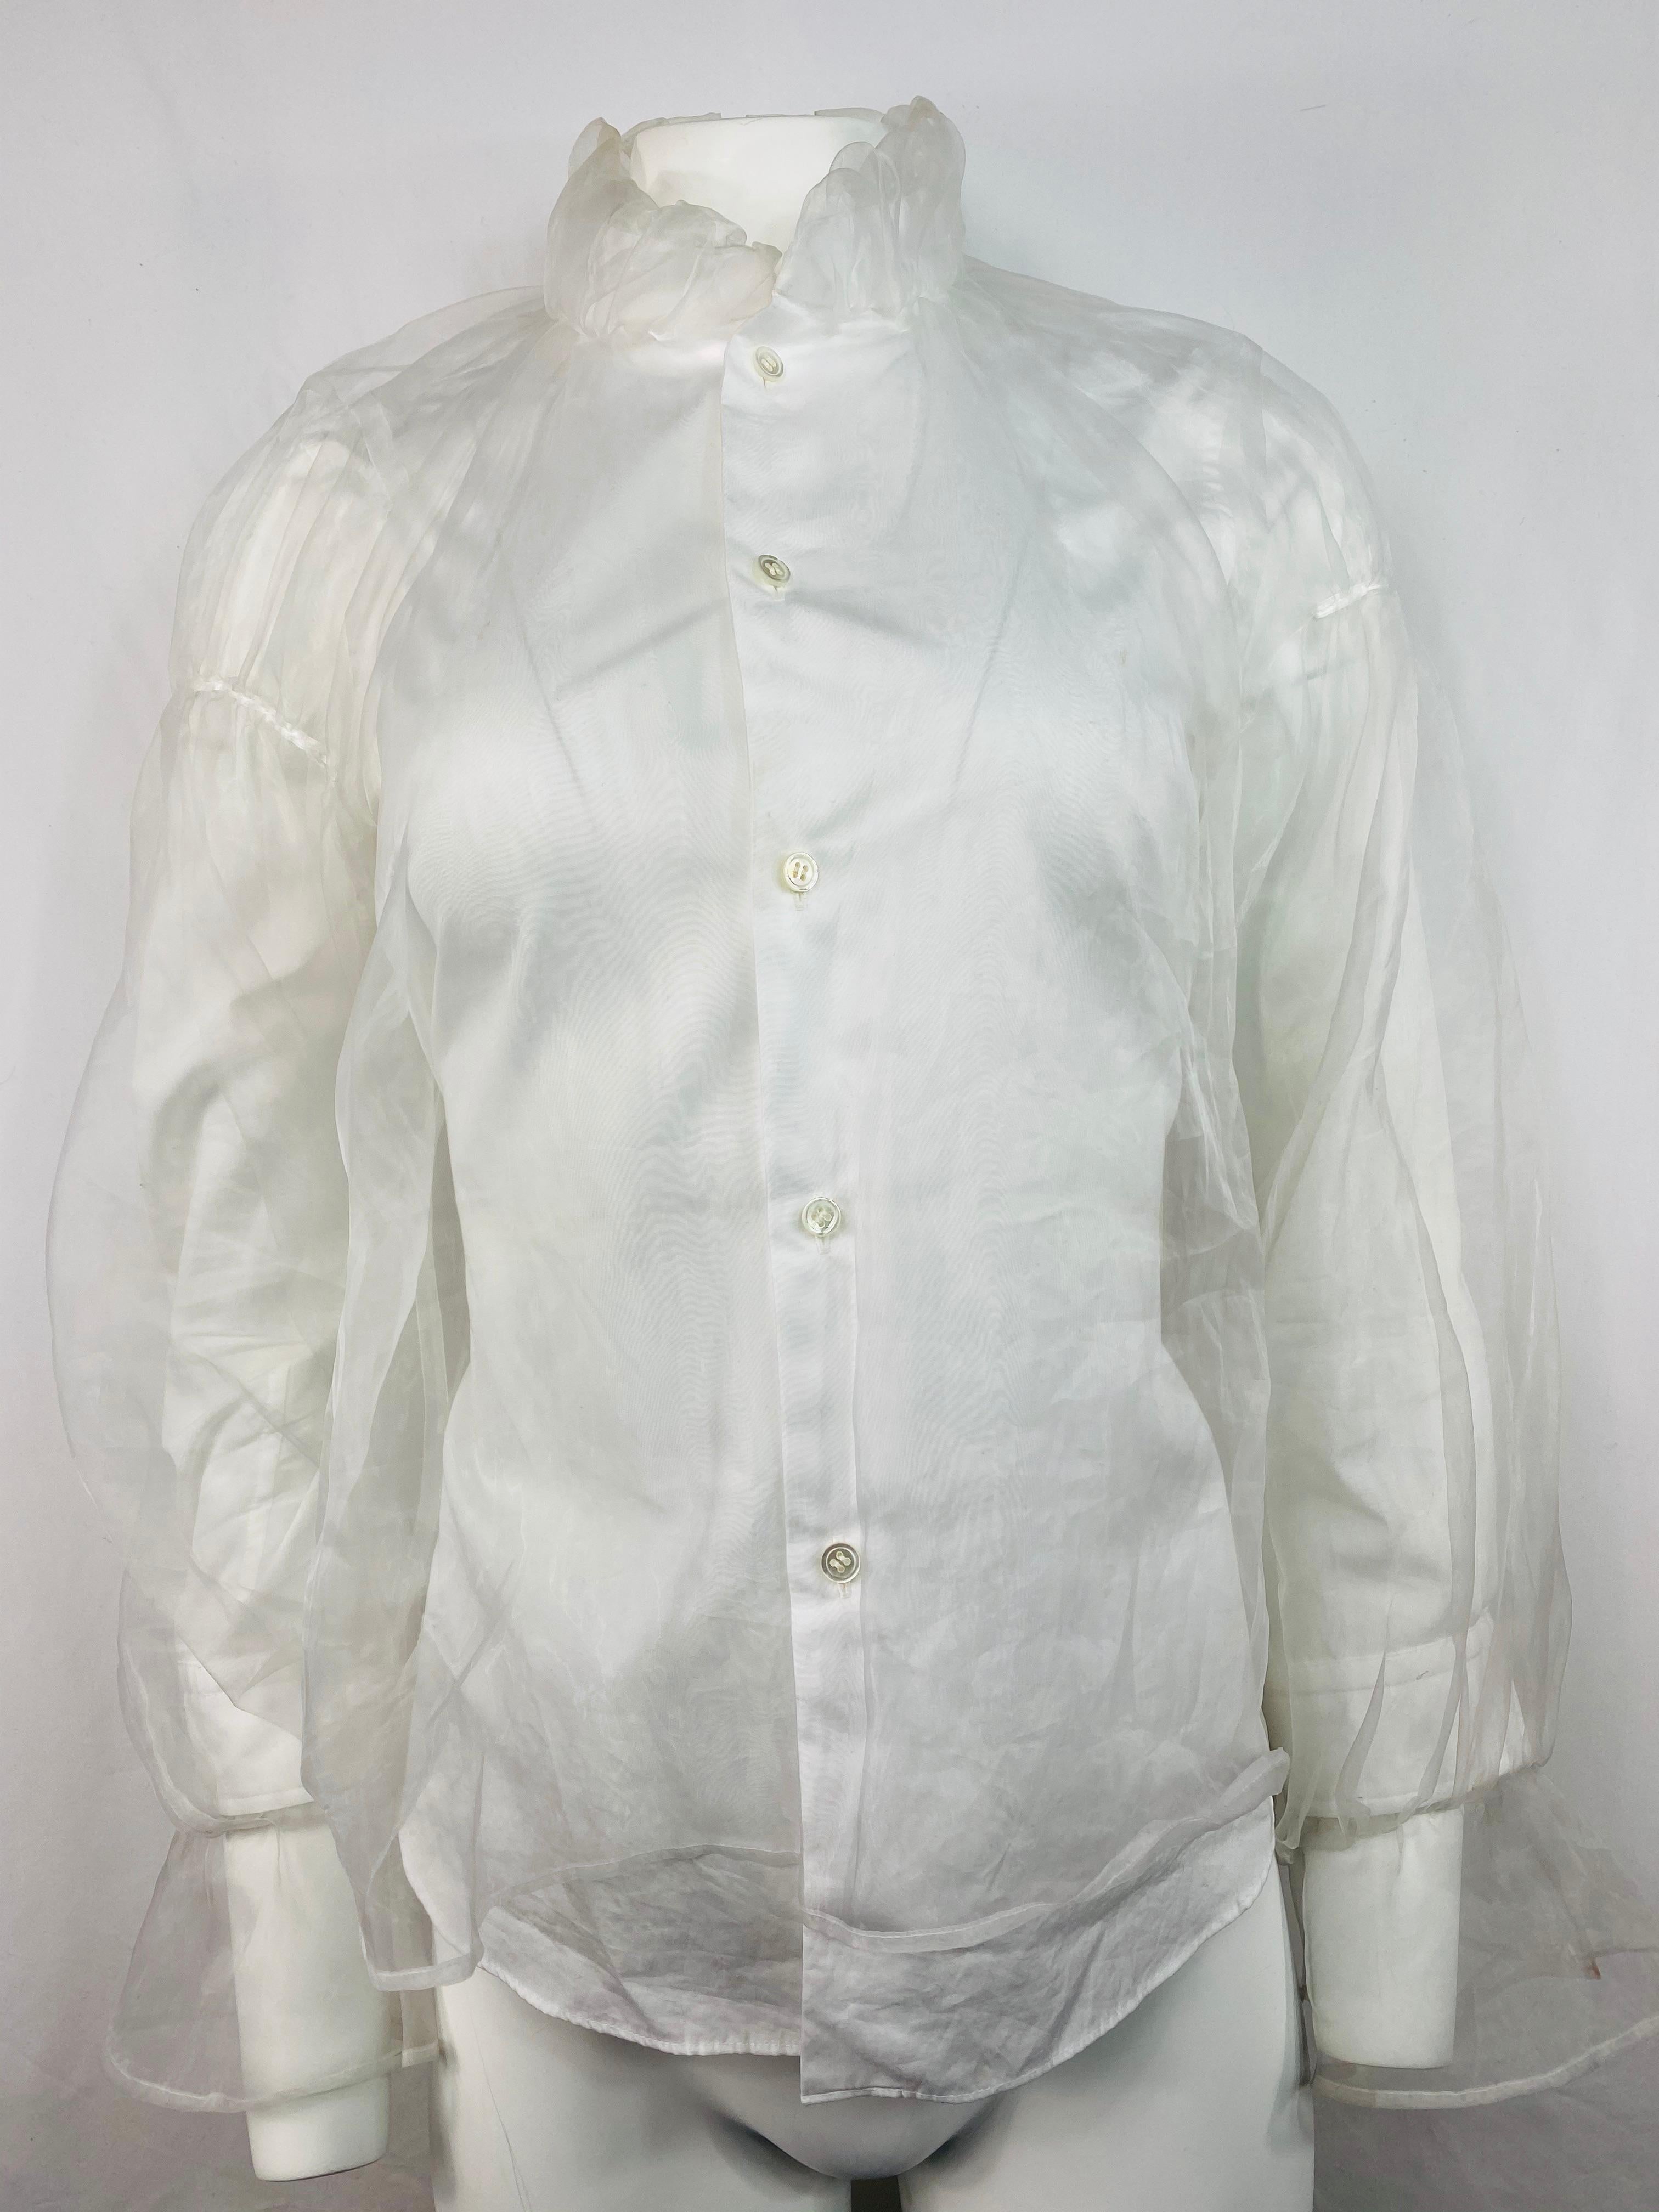 Produxt details:

White see through button down shirt with white under shirt at the front and sleeves that ties on the back. Featuring ruffled collar and flare designed sleeves detail on the bottom.
Made in Japan.